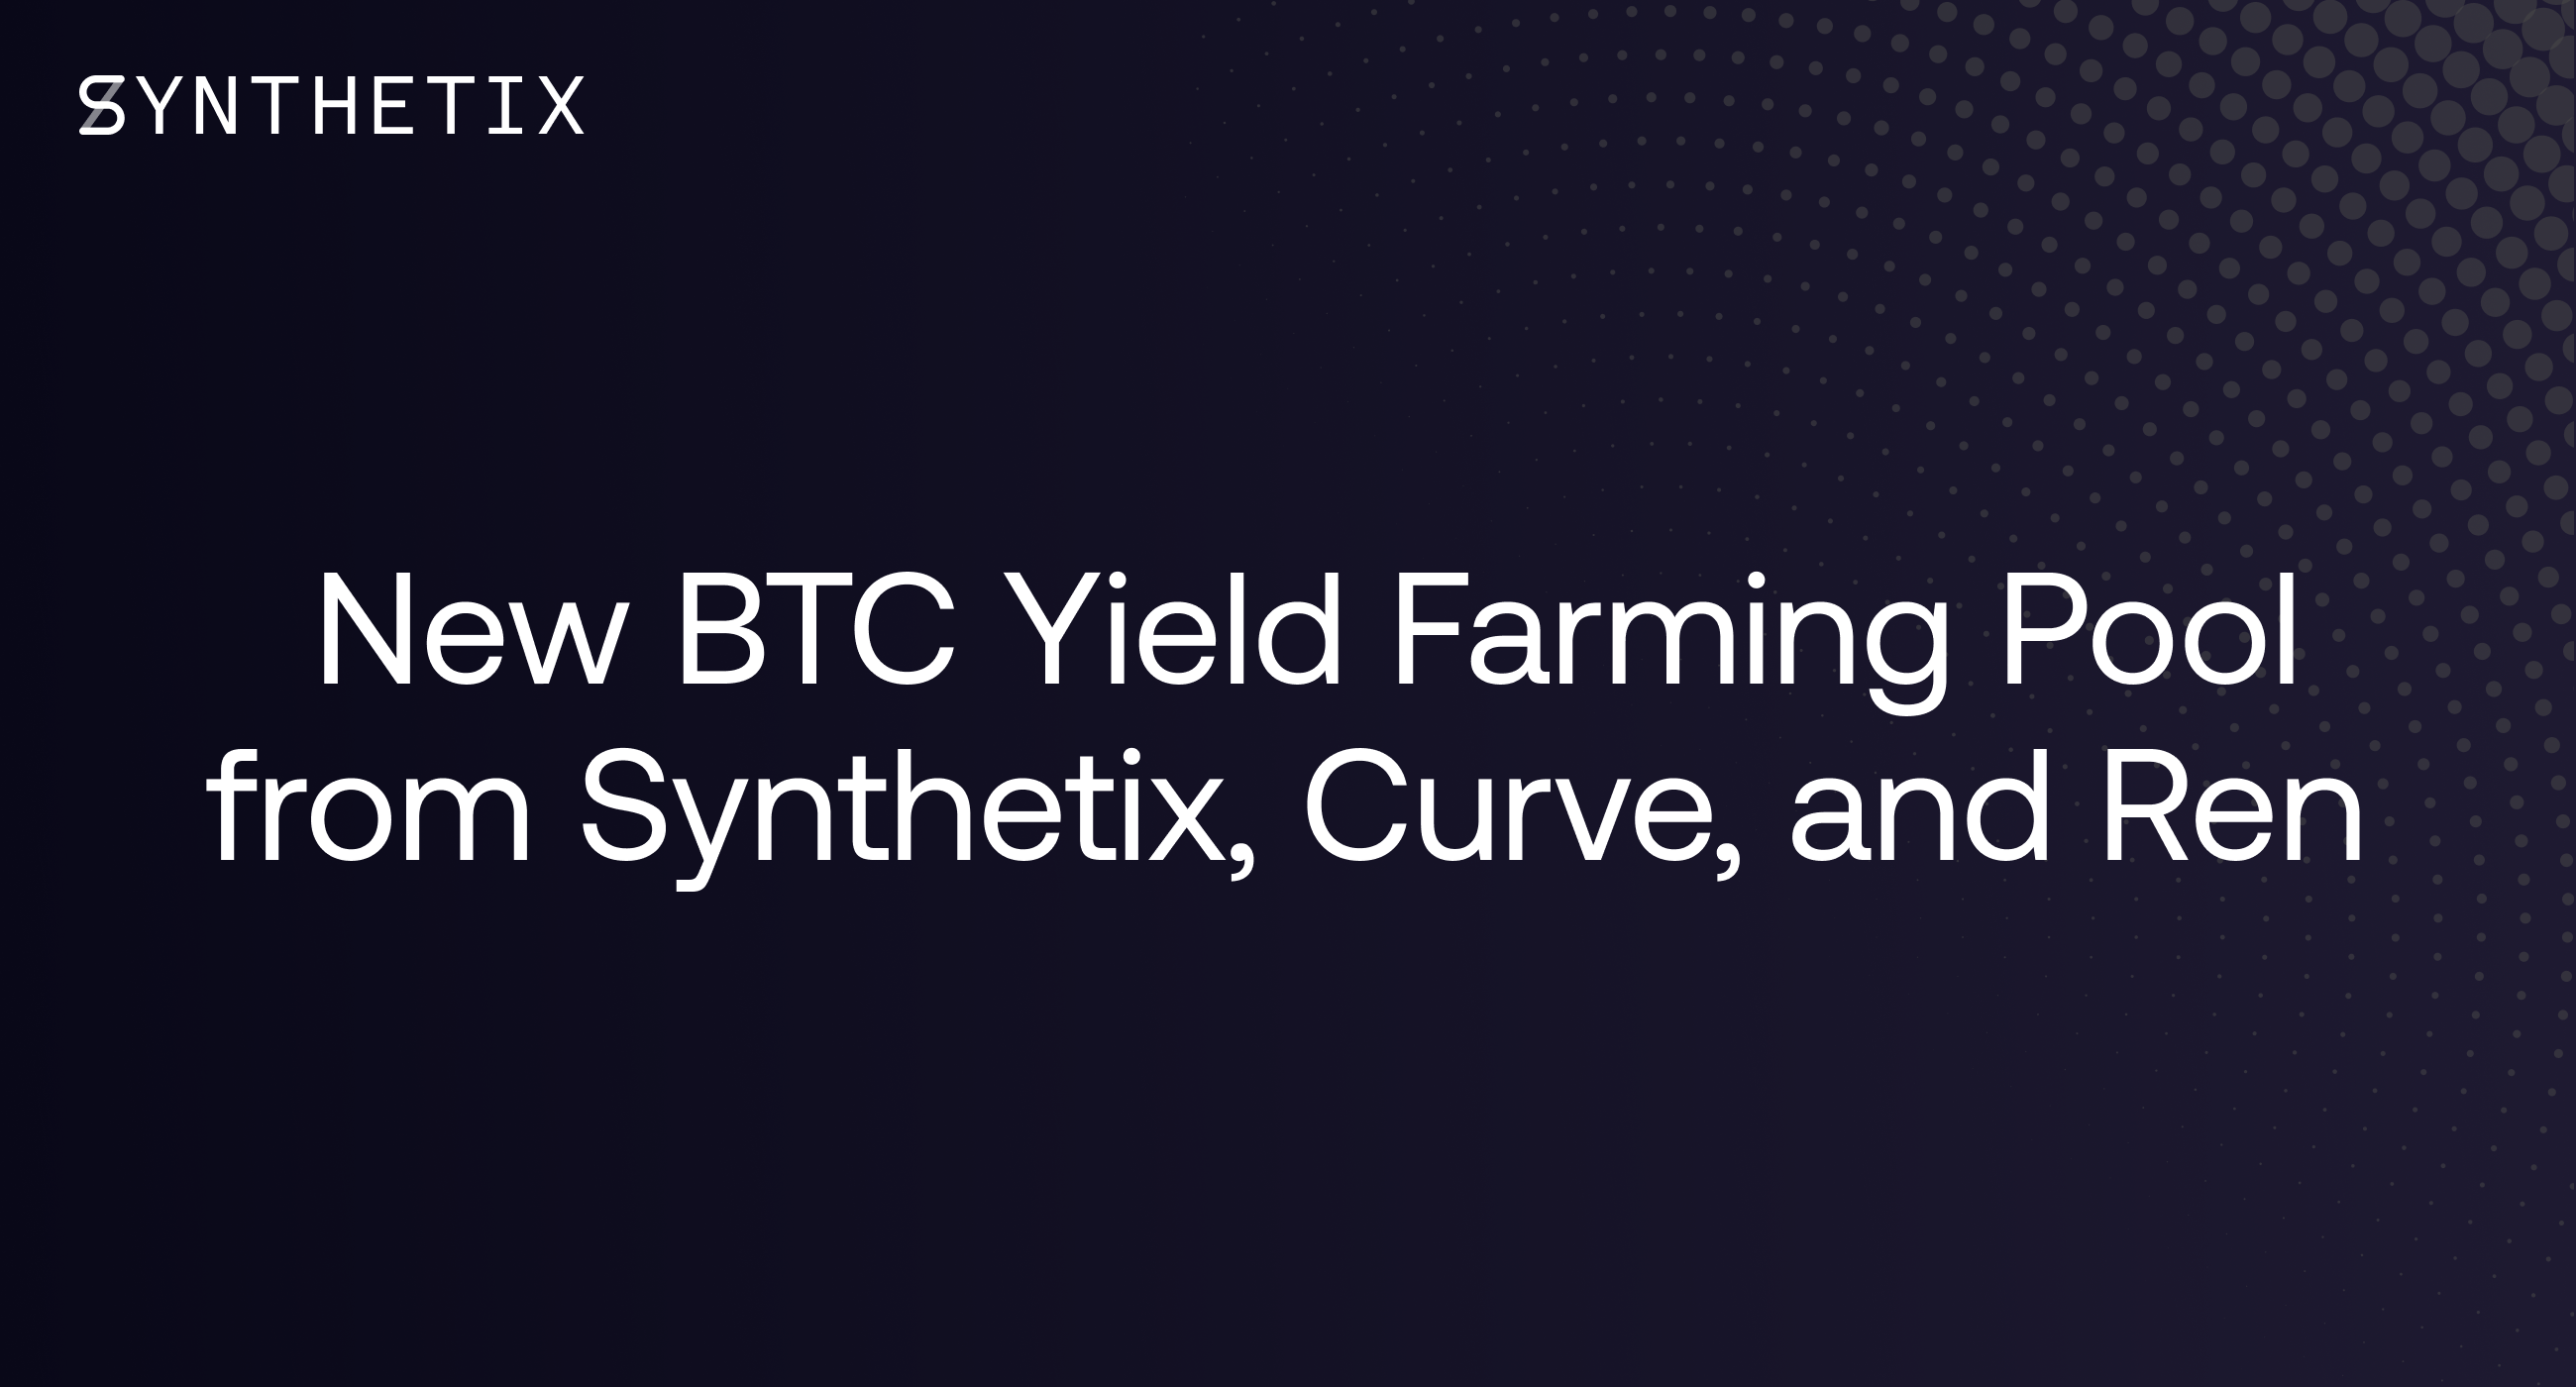 New BTC Yield Farming Pool from Synthetix, Curve, and Ren